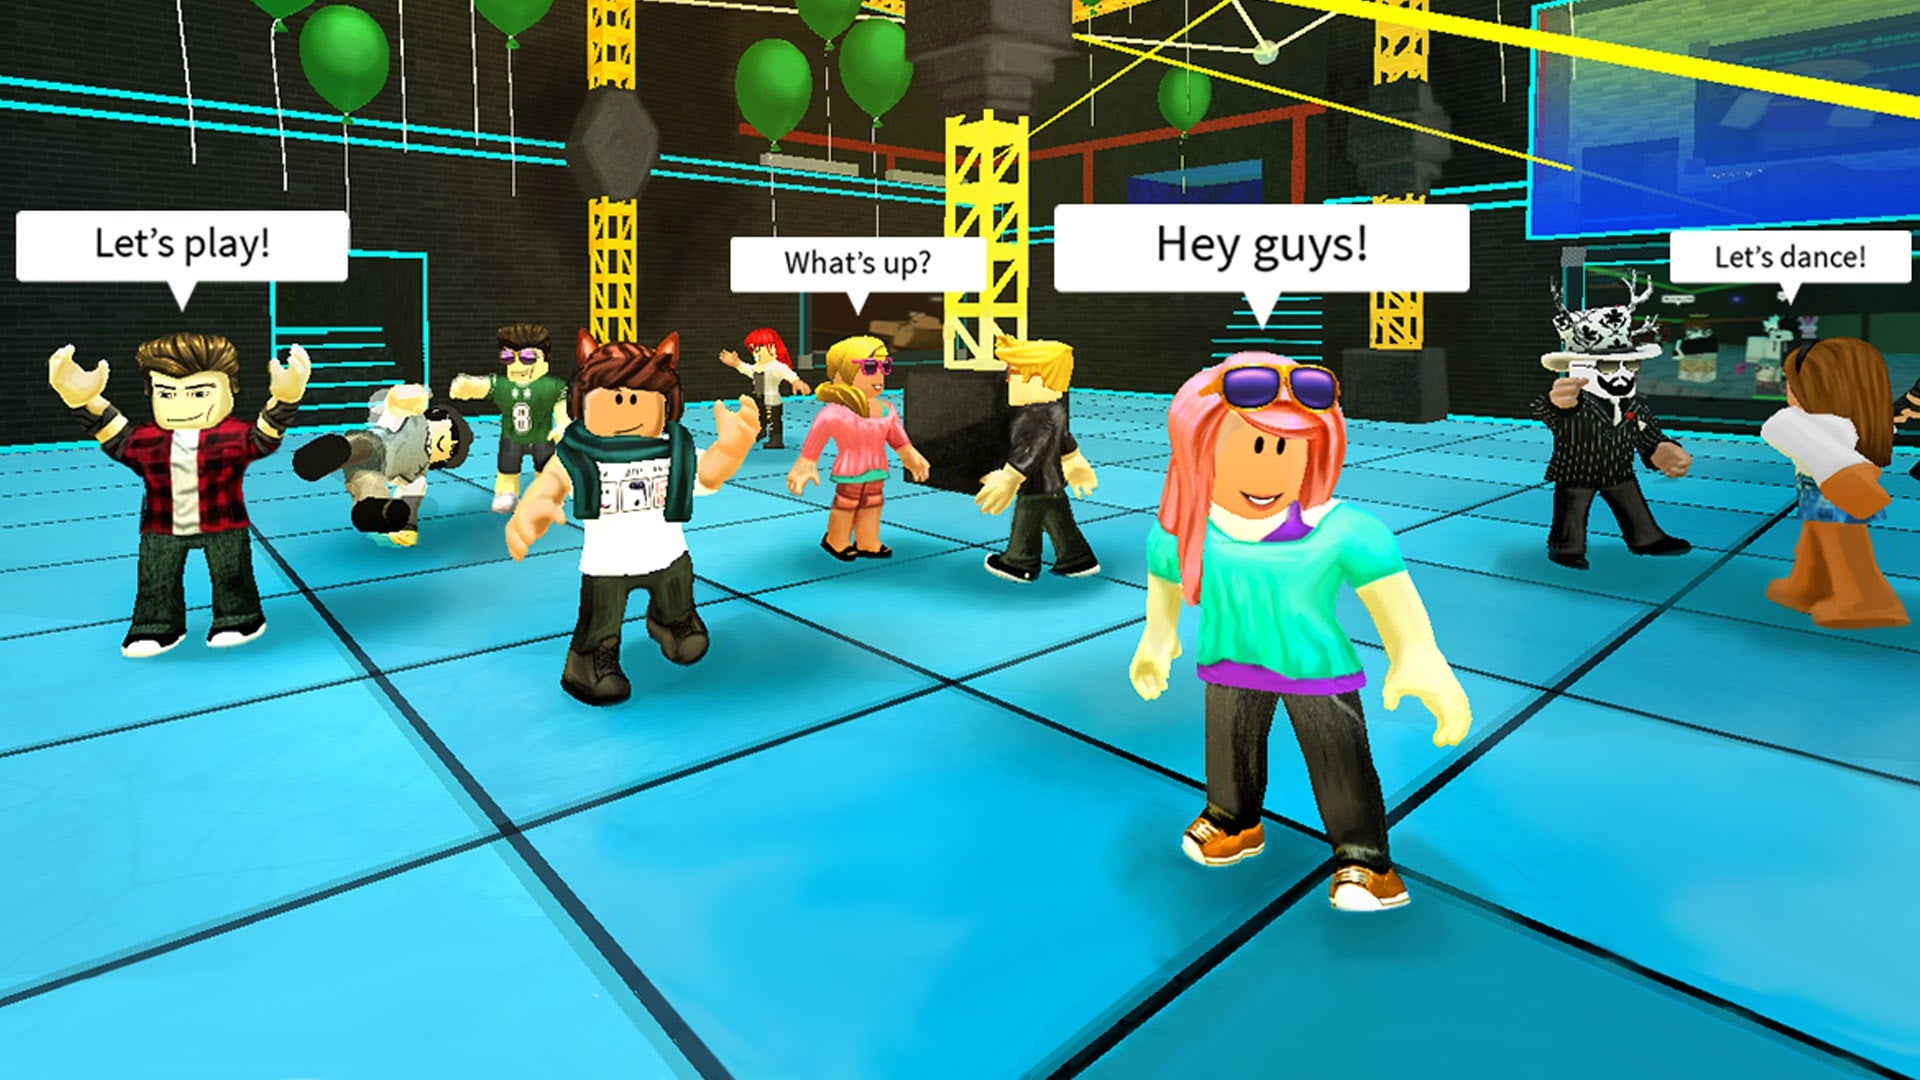 Sounds Bringing ROBLOX Games to Life - Roblox Blog